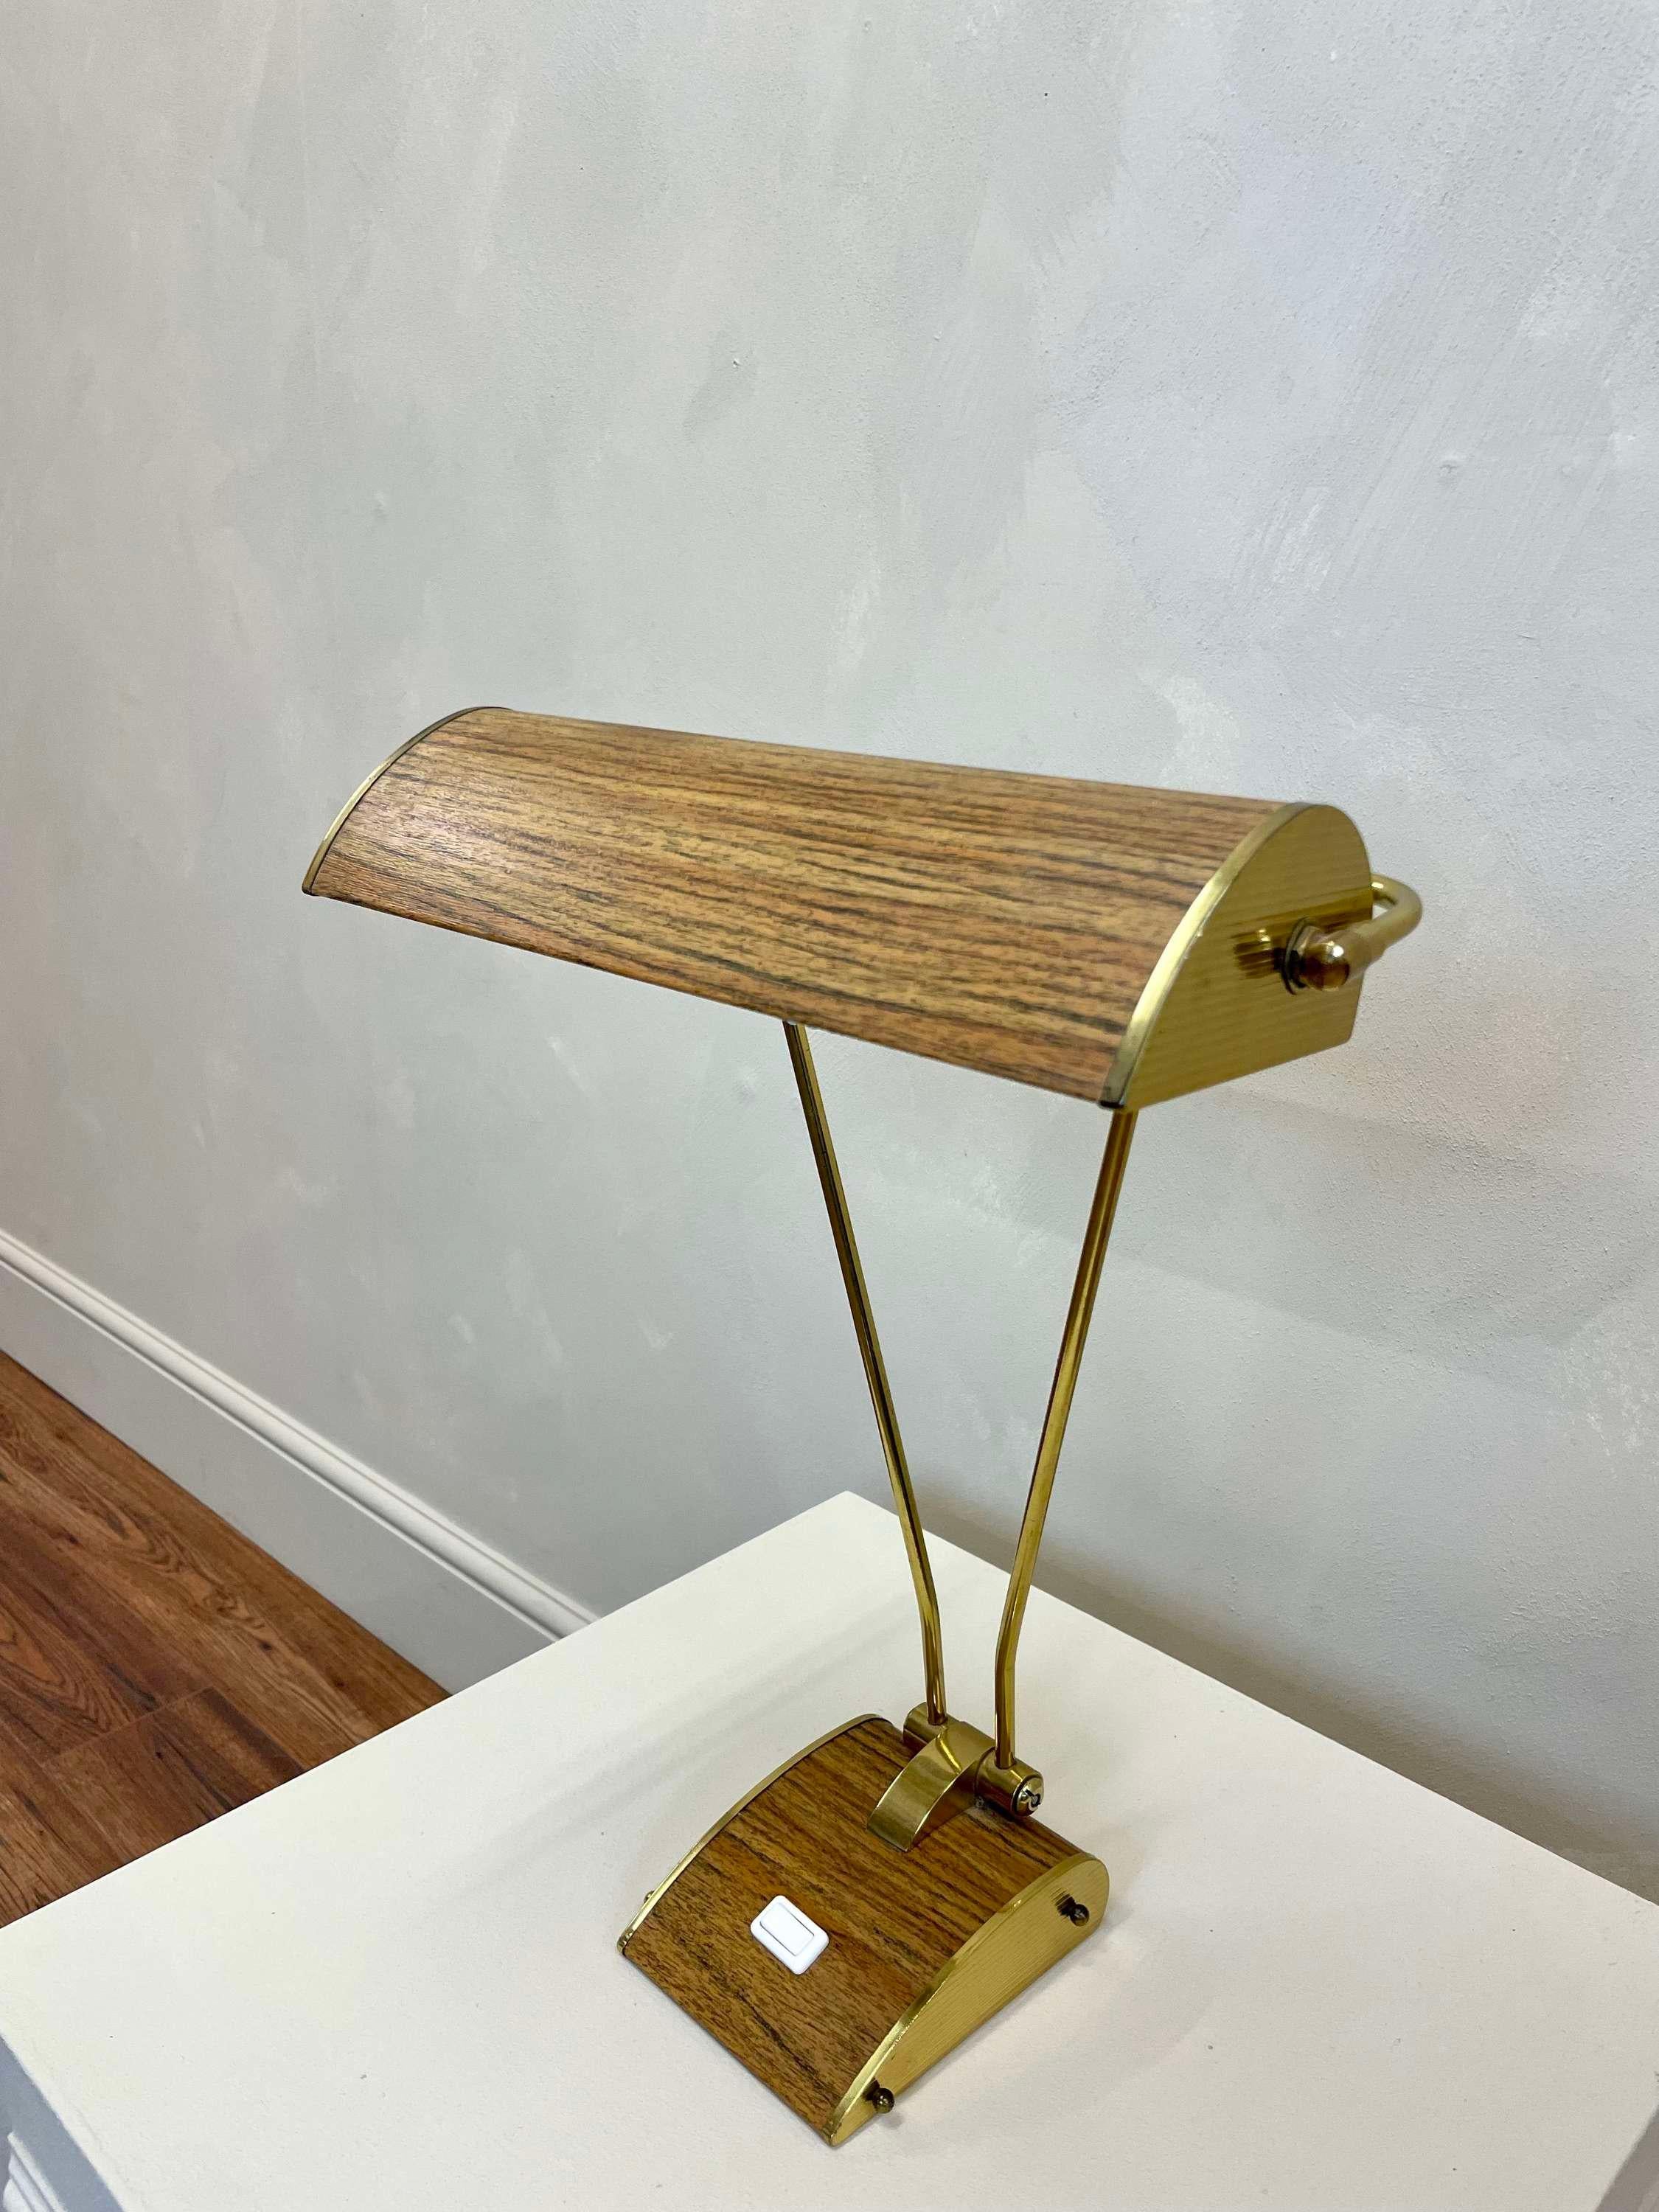 Art Deco Desk Lamp from the 1930s produced by Jumo France, designed in 1935 by one of the most successful designers in history Eileen Gray (Irish, 1879 – 1976).
Jumo has especially made a name because of their reliability and the production of Art